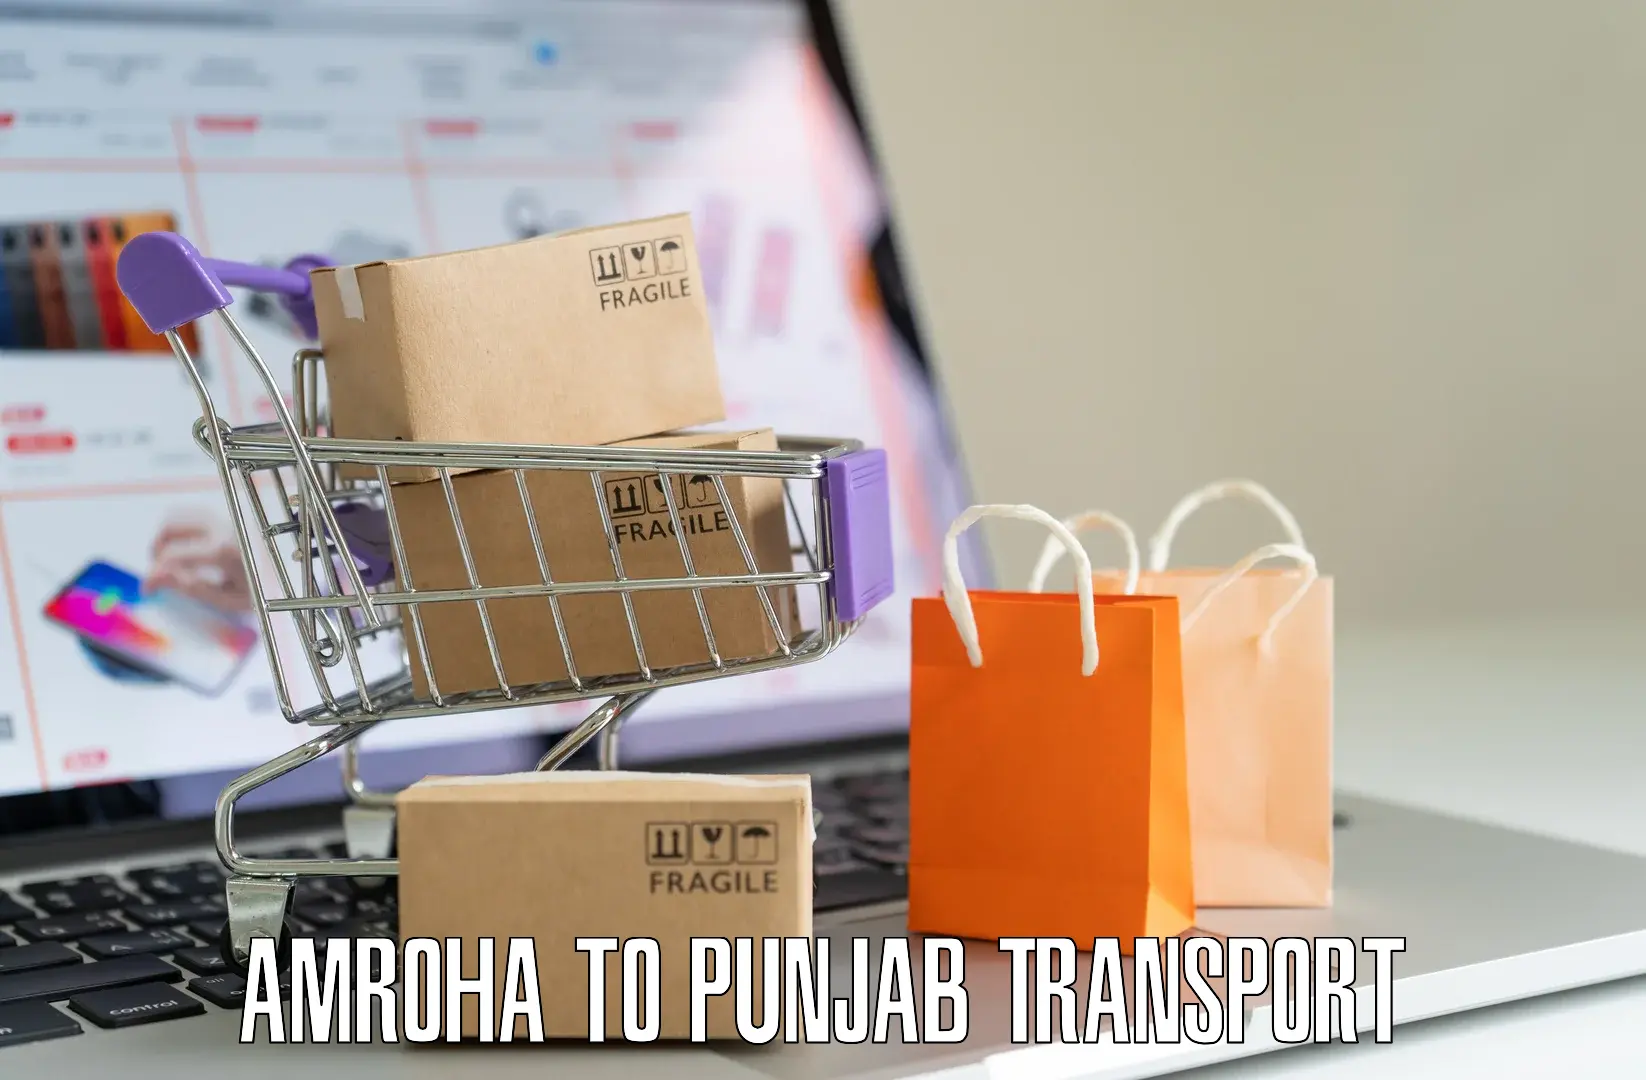 Nationwide transport services Amroha to Malout